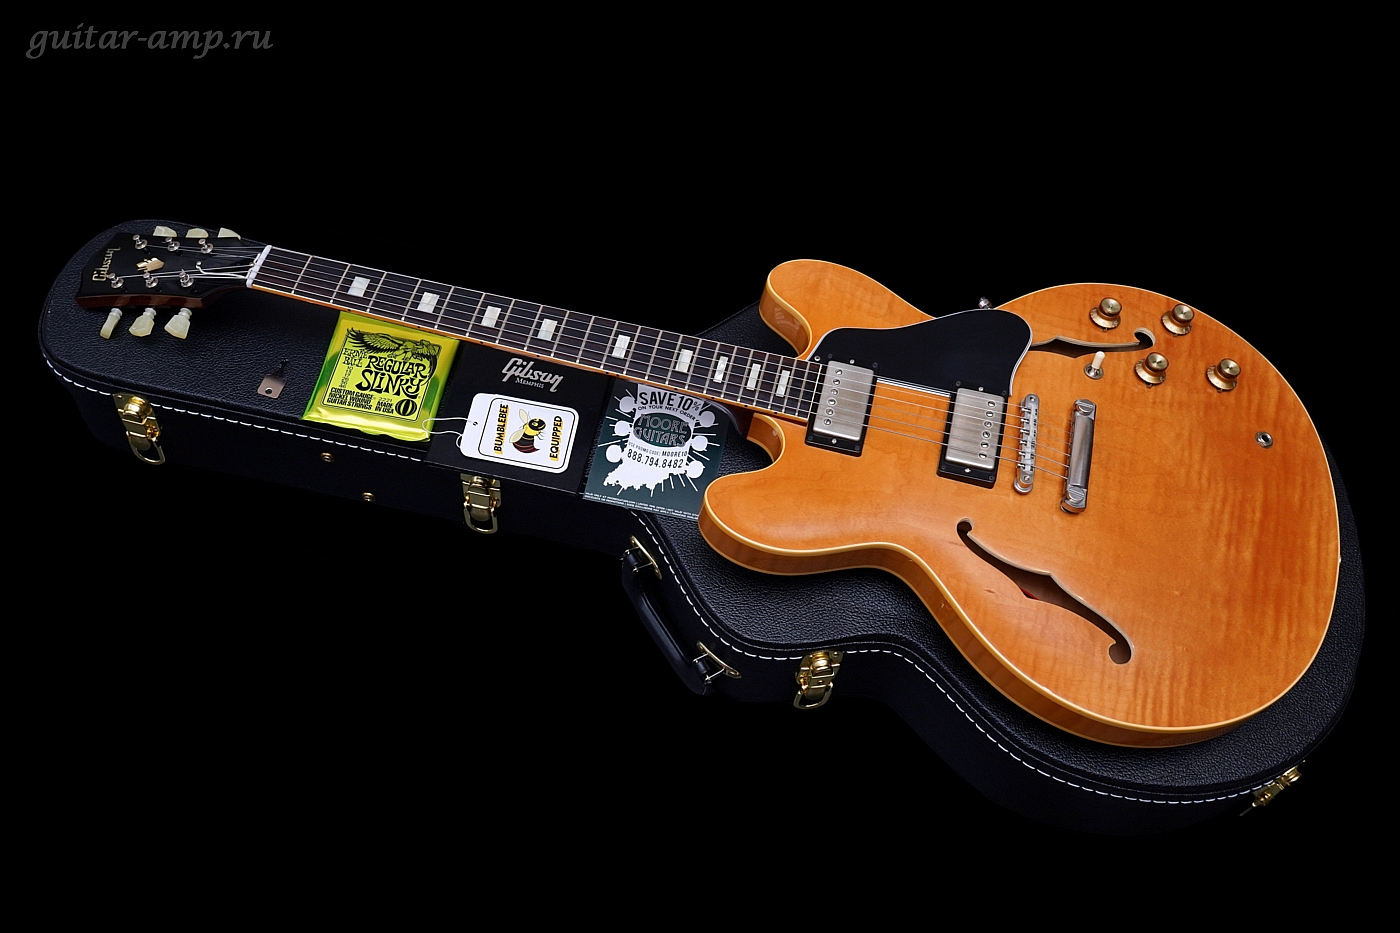 Gibson ES-335 TD Block Inlay 1963 Historic Reissue VOS Flamed Top Limited Run Rare 2015